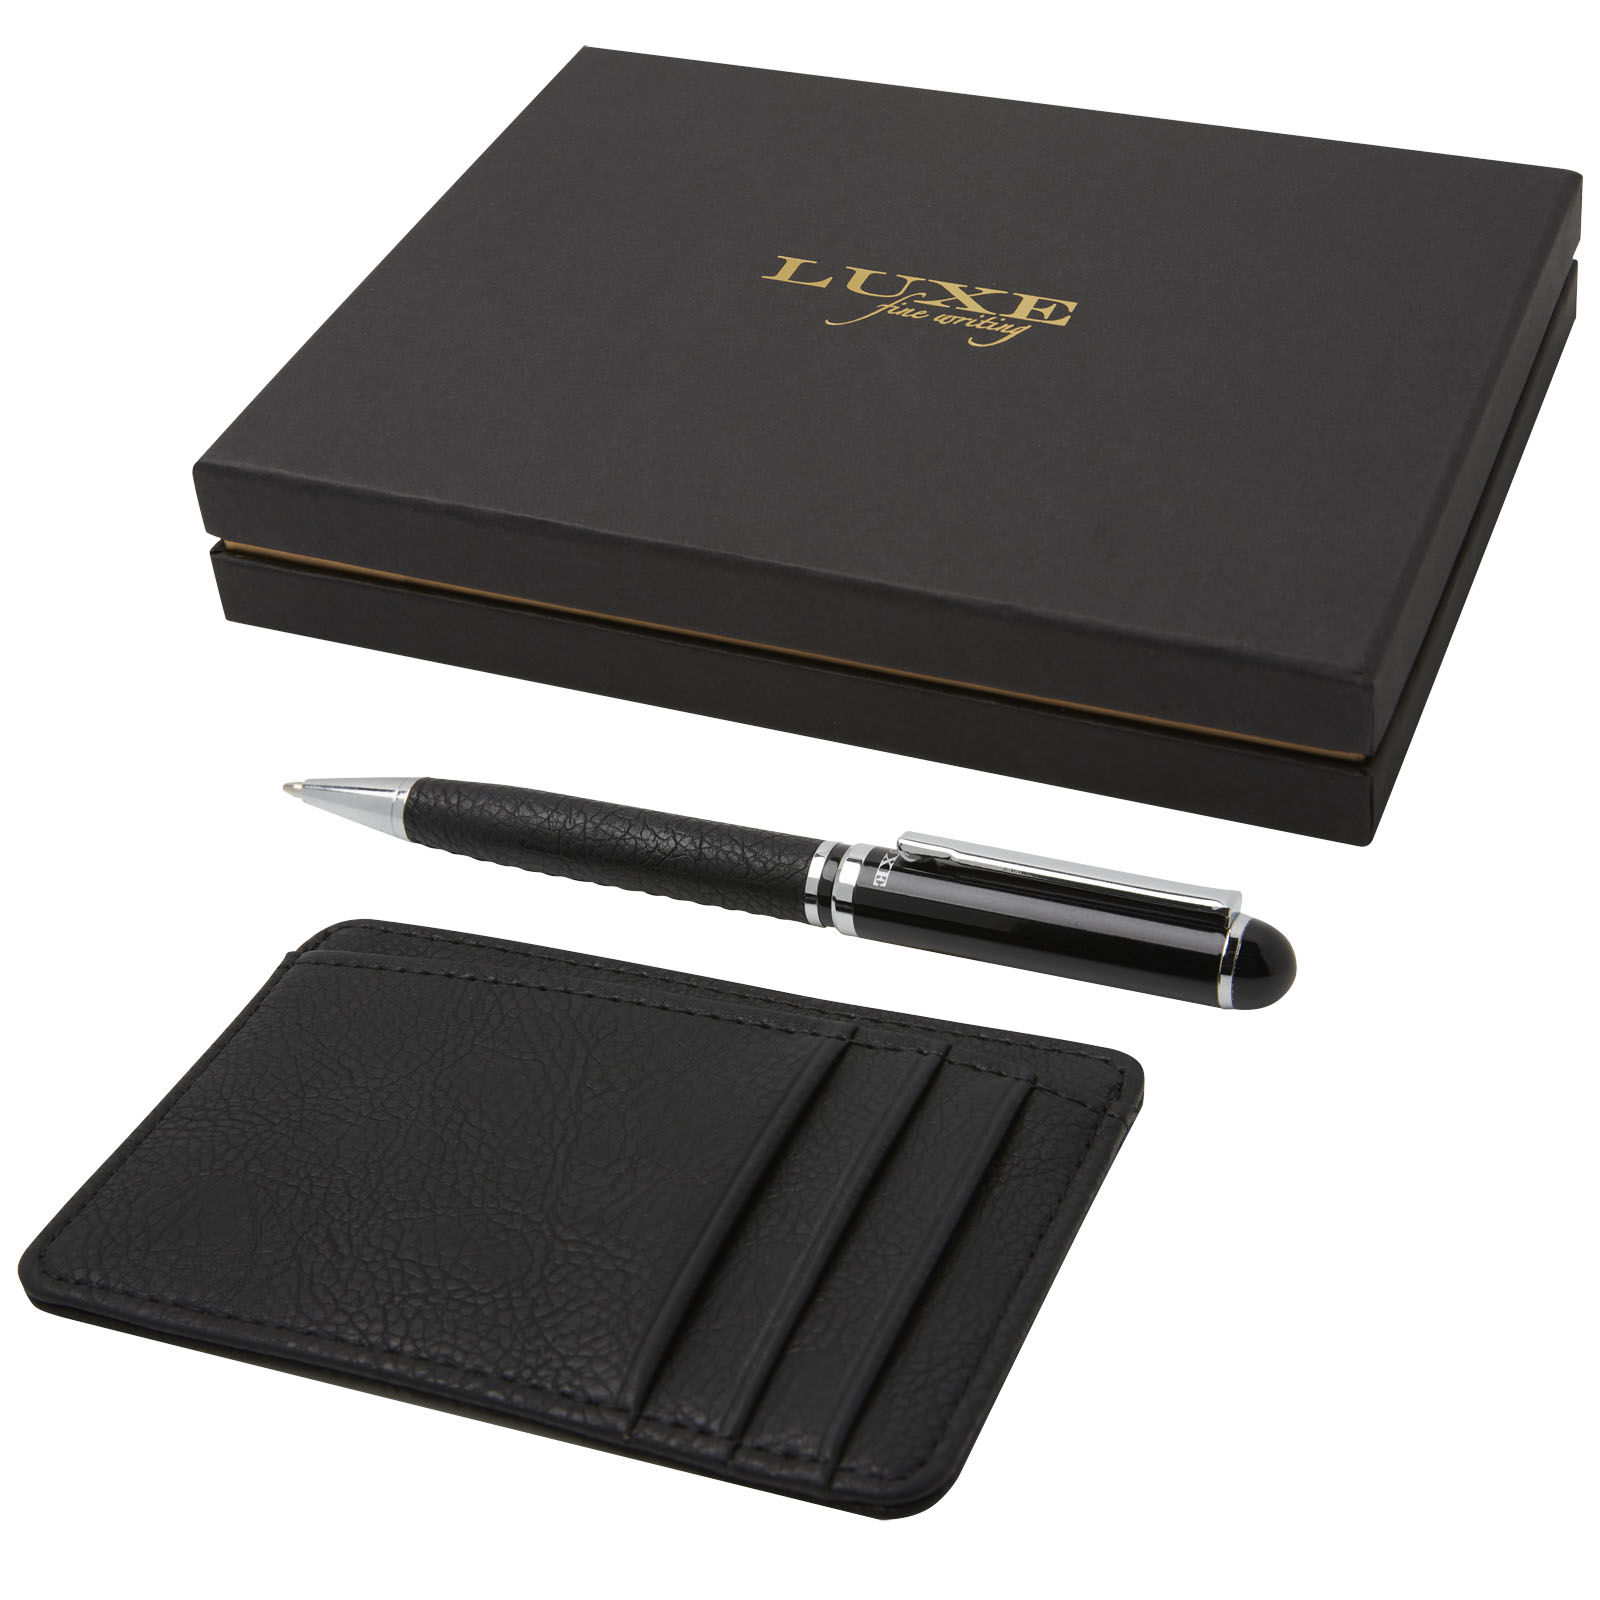 Gift sets - Encore ballpoint pen and wallet gift set